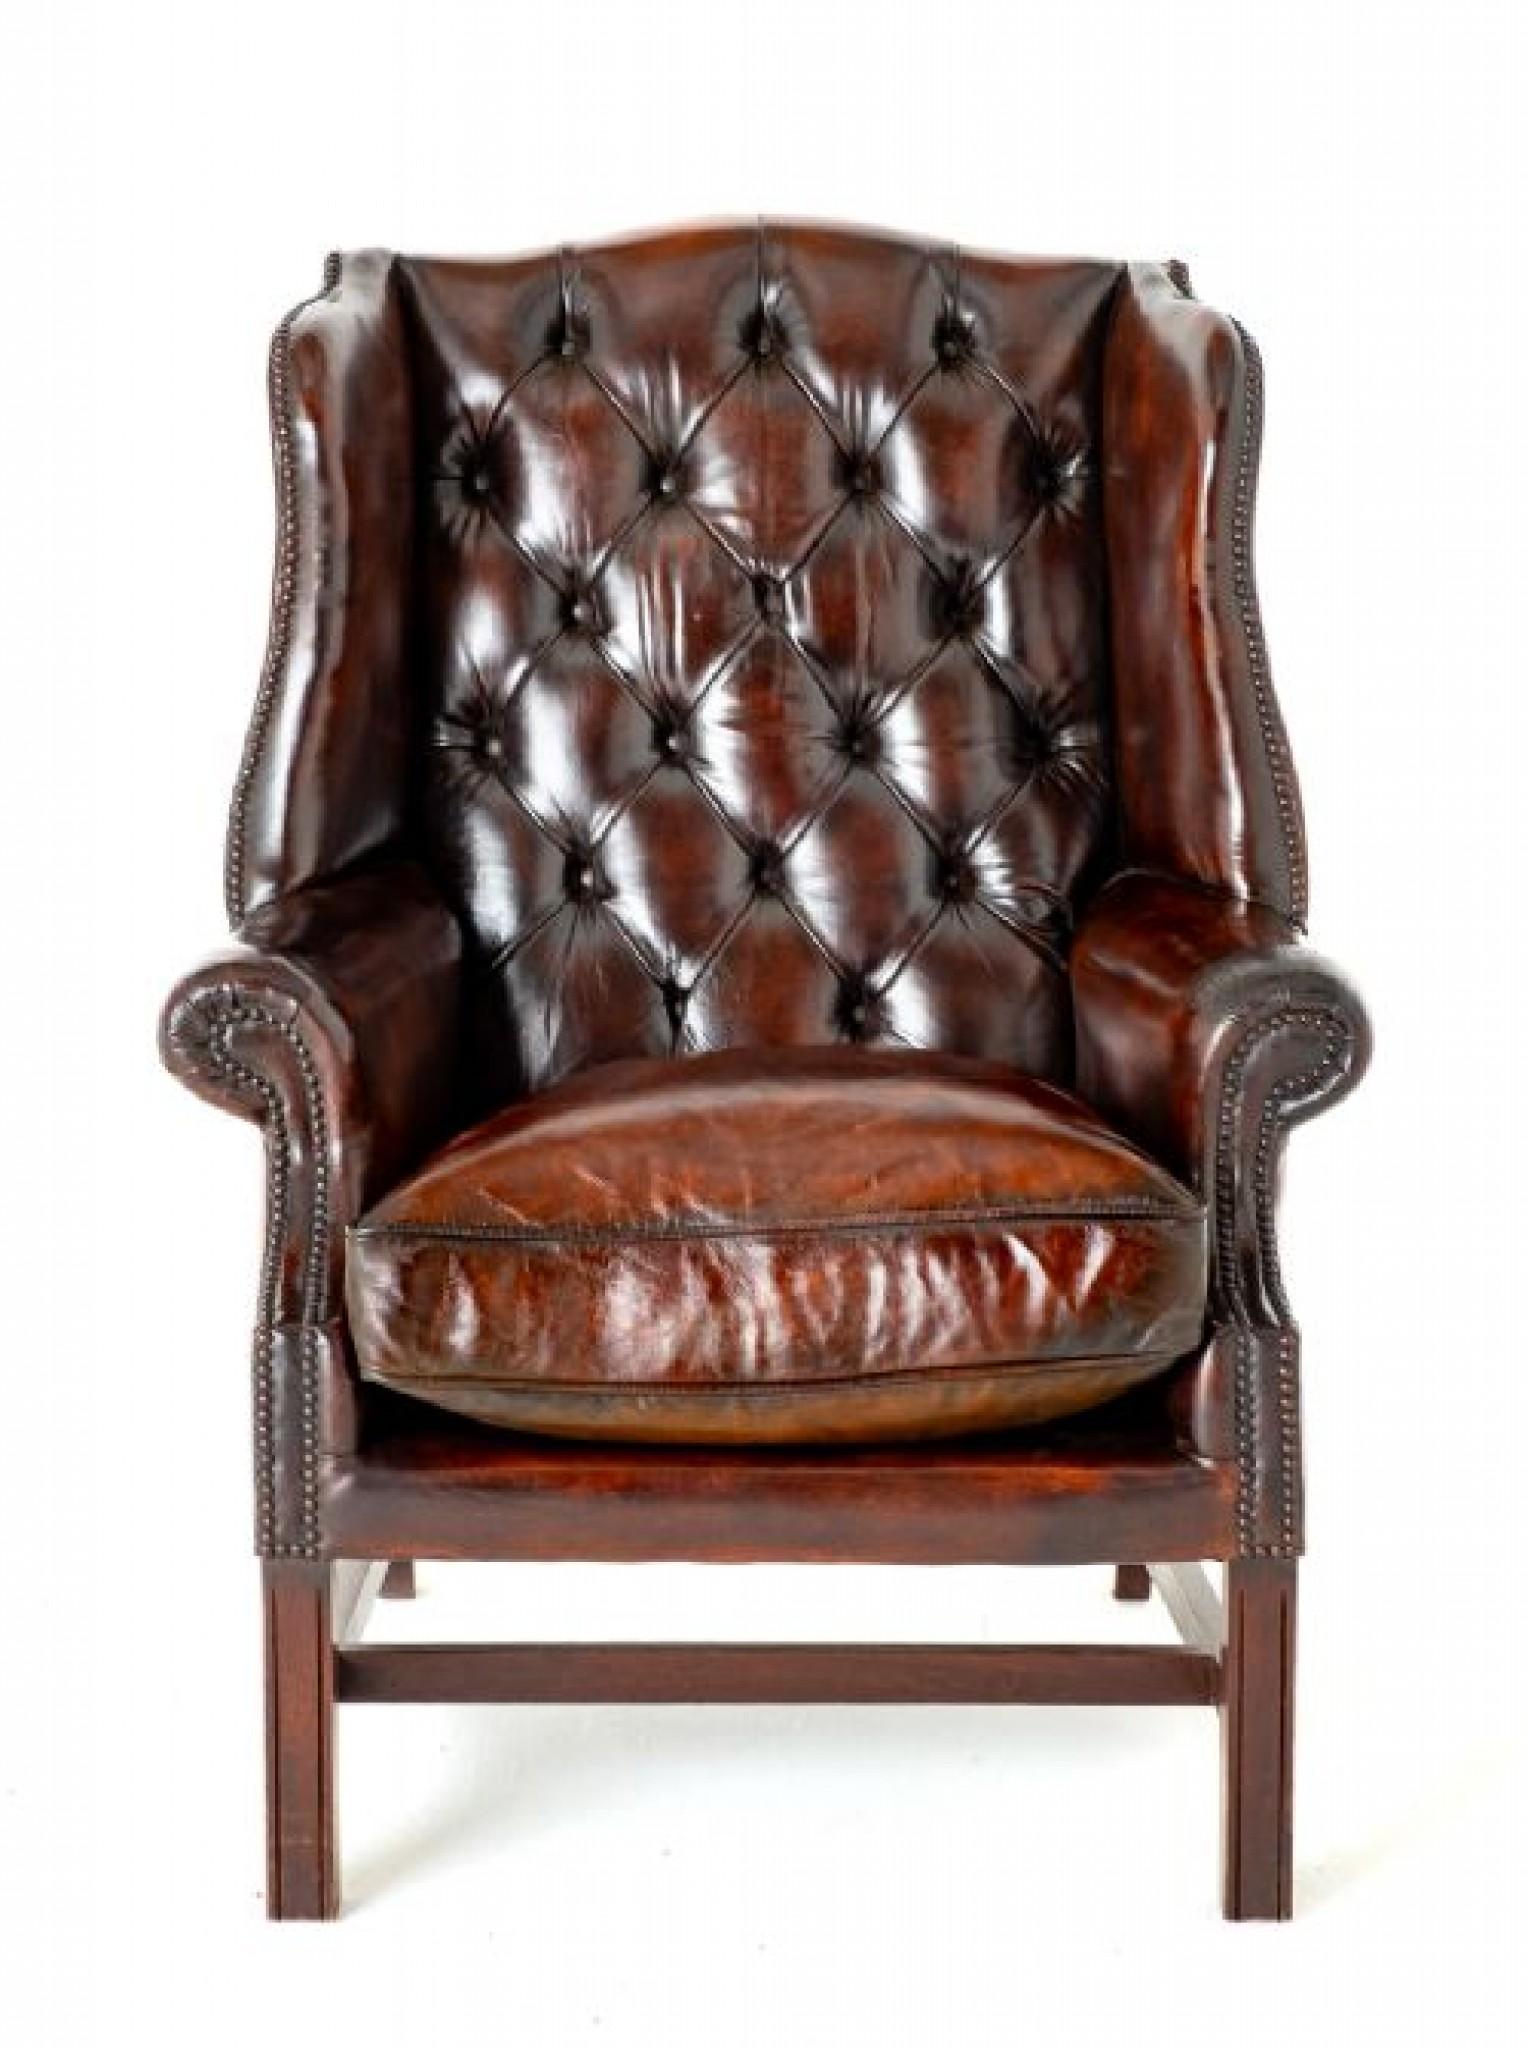 Early 20th Century Georgian Leather Wing Chair Chesterfield Revival For Sale